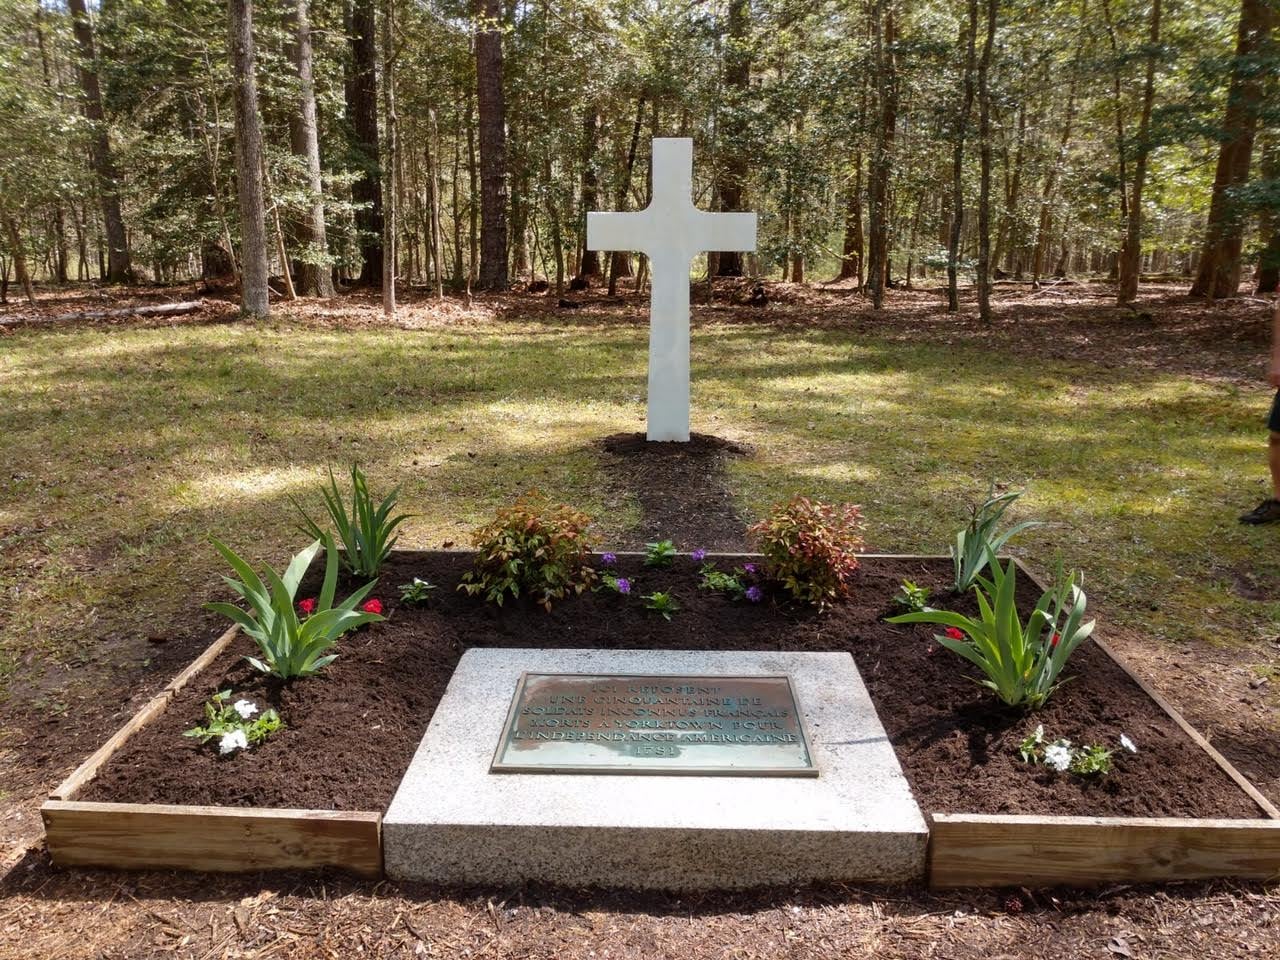 5.Cleanup, French Cemetery-April 10 2021